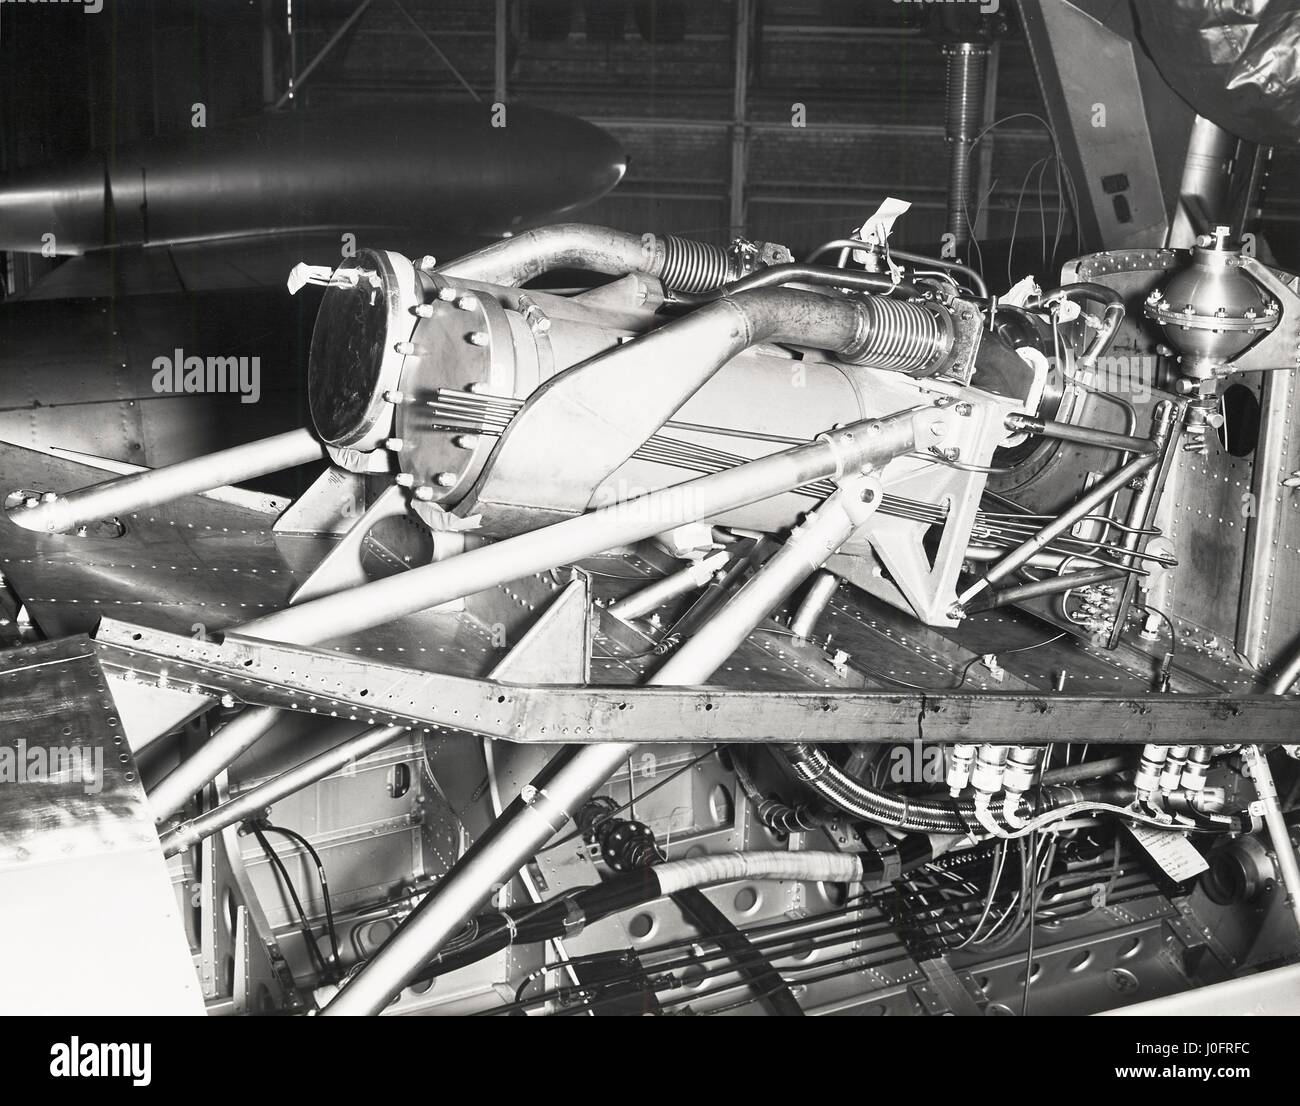 Mounted in the bomb bay of EE Canberra WK163 the Napier NSc 2 Double Scorpion rocket engine Stock Photo